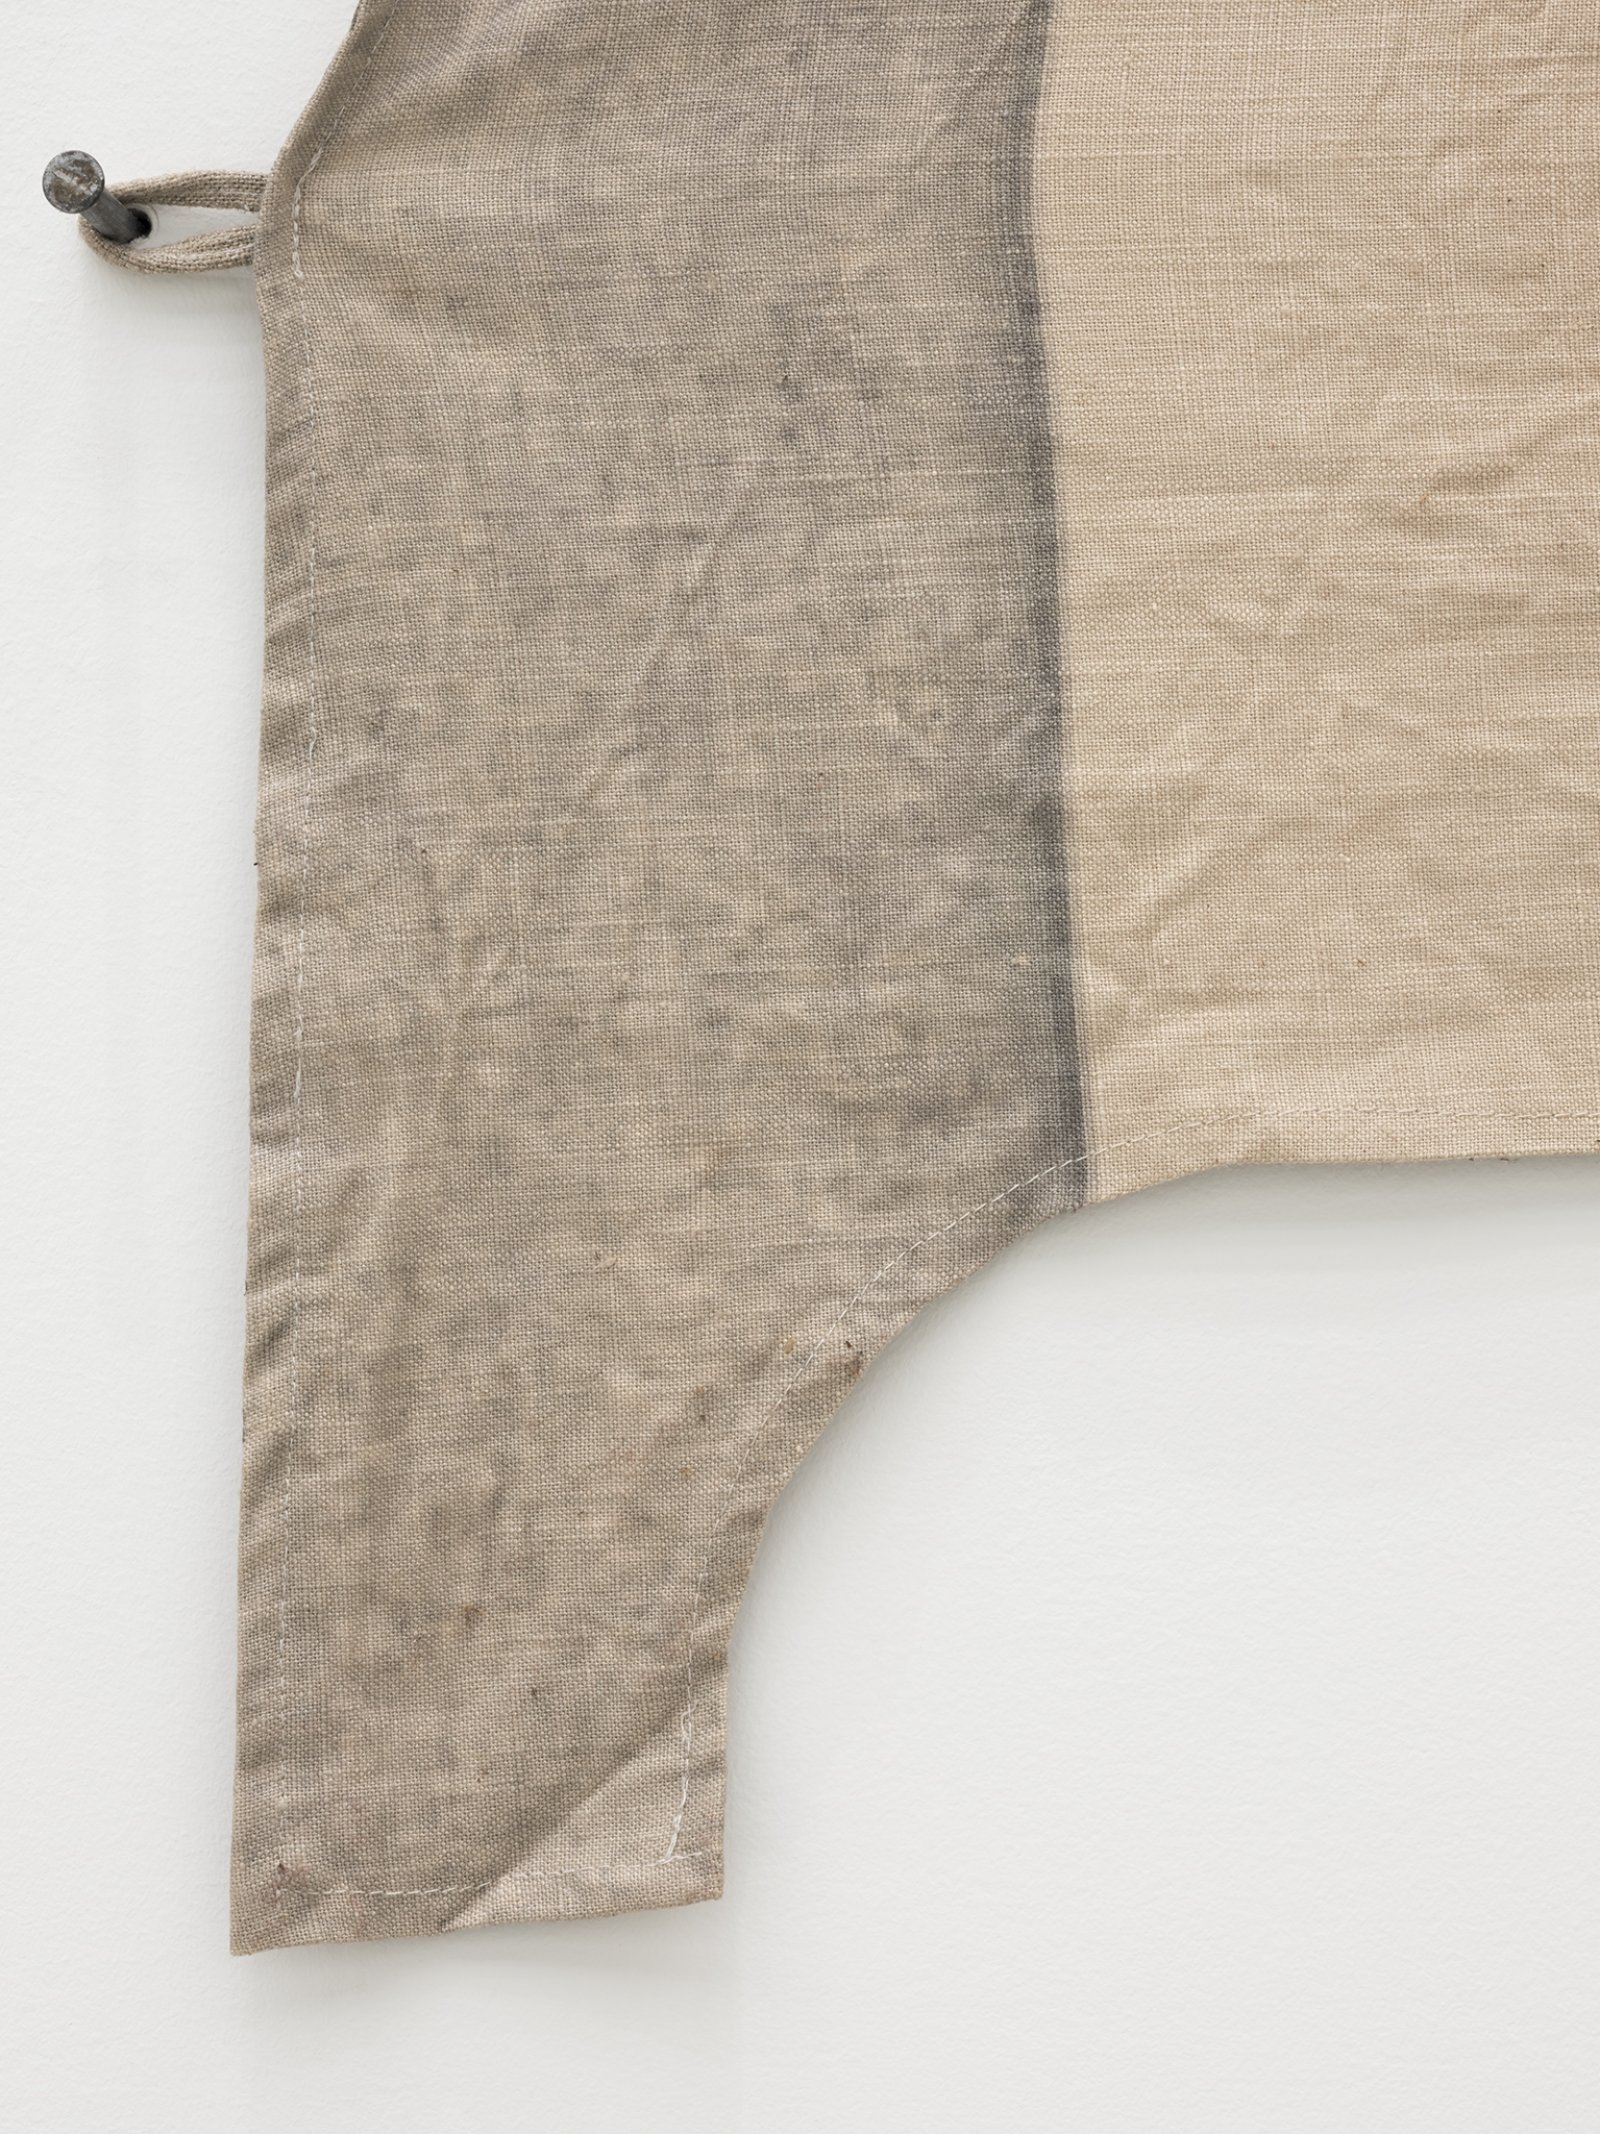 Duane Linklater, Tipi cover for unknown future horizon / Indian lemonade diamond for Mina (detail), 2018, digital print on hand-dyed linen, cedar, sumac, charcoal, nails, 113 x 213 in. (287 x 541 cm)